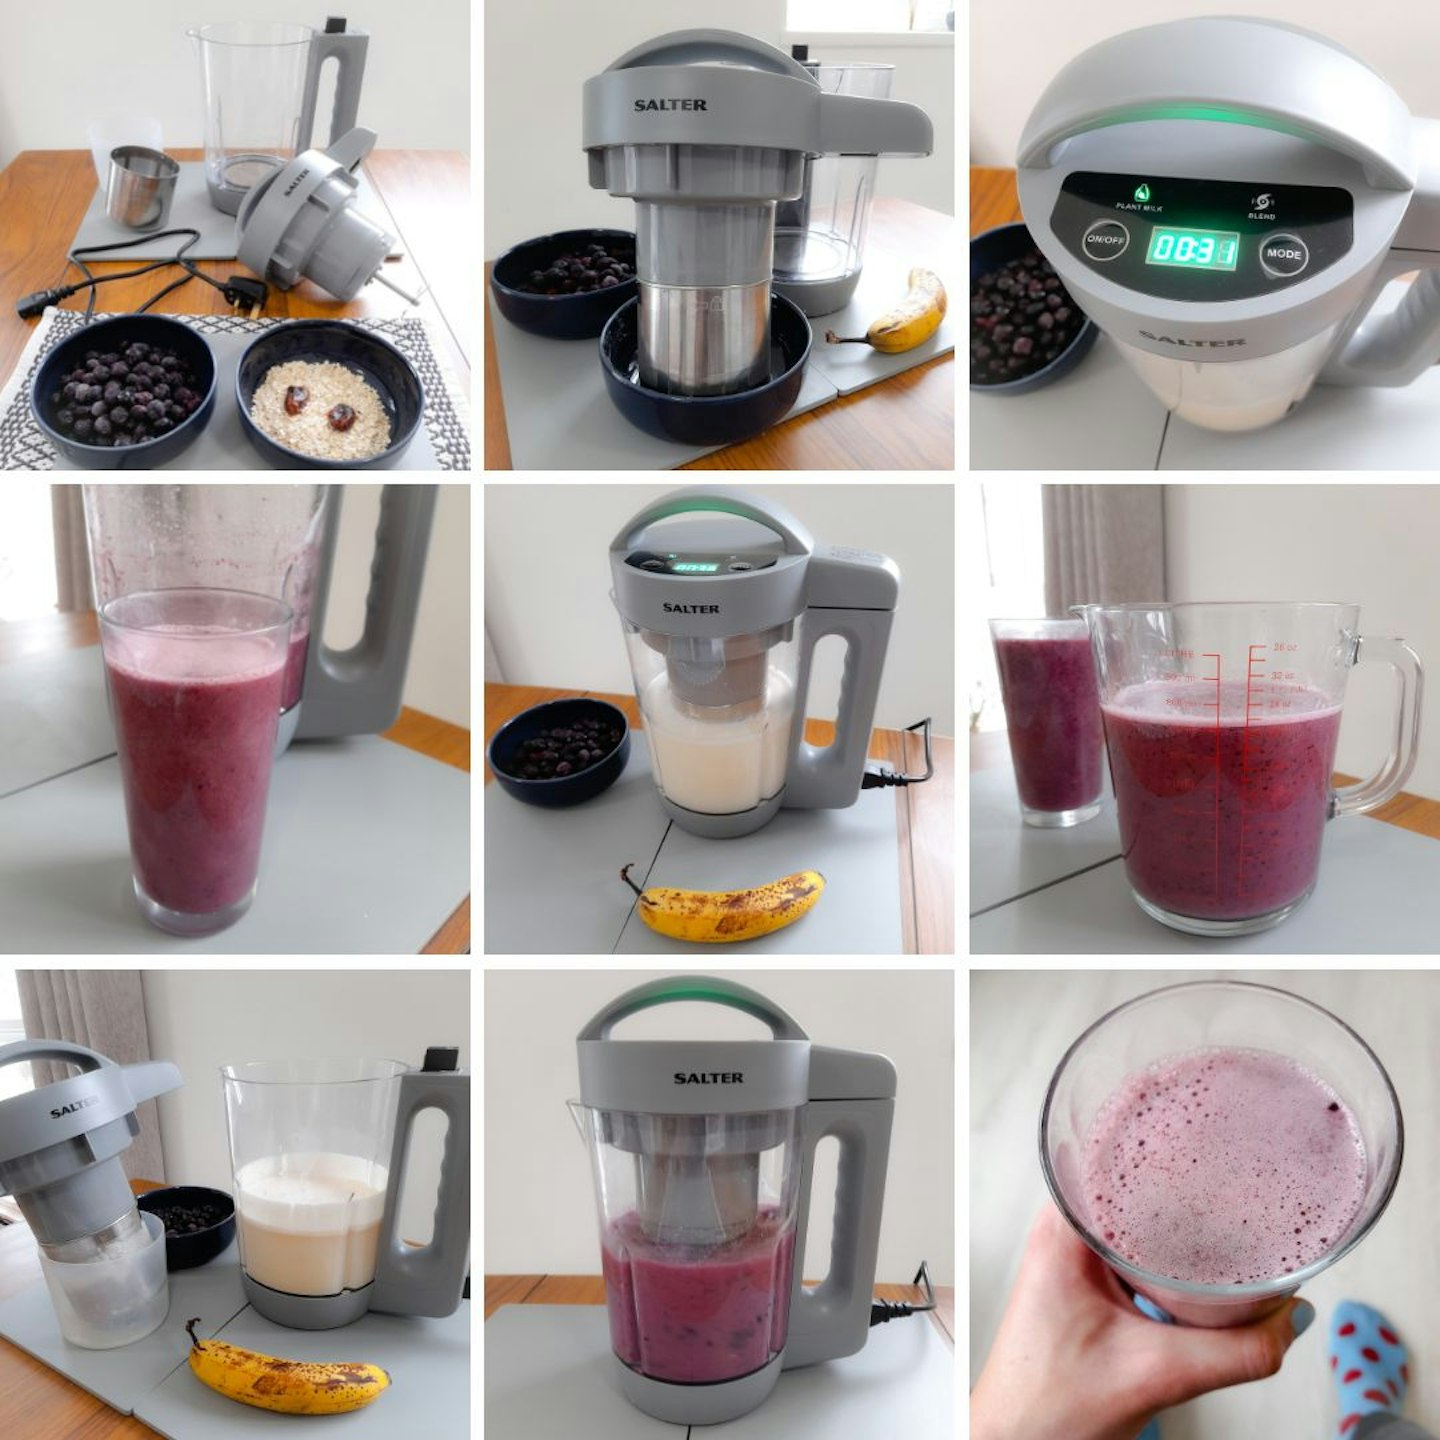 Making blueberry smoothie with the Salter Plant M!lk Maker